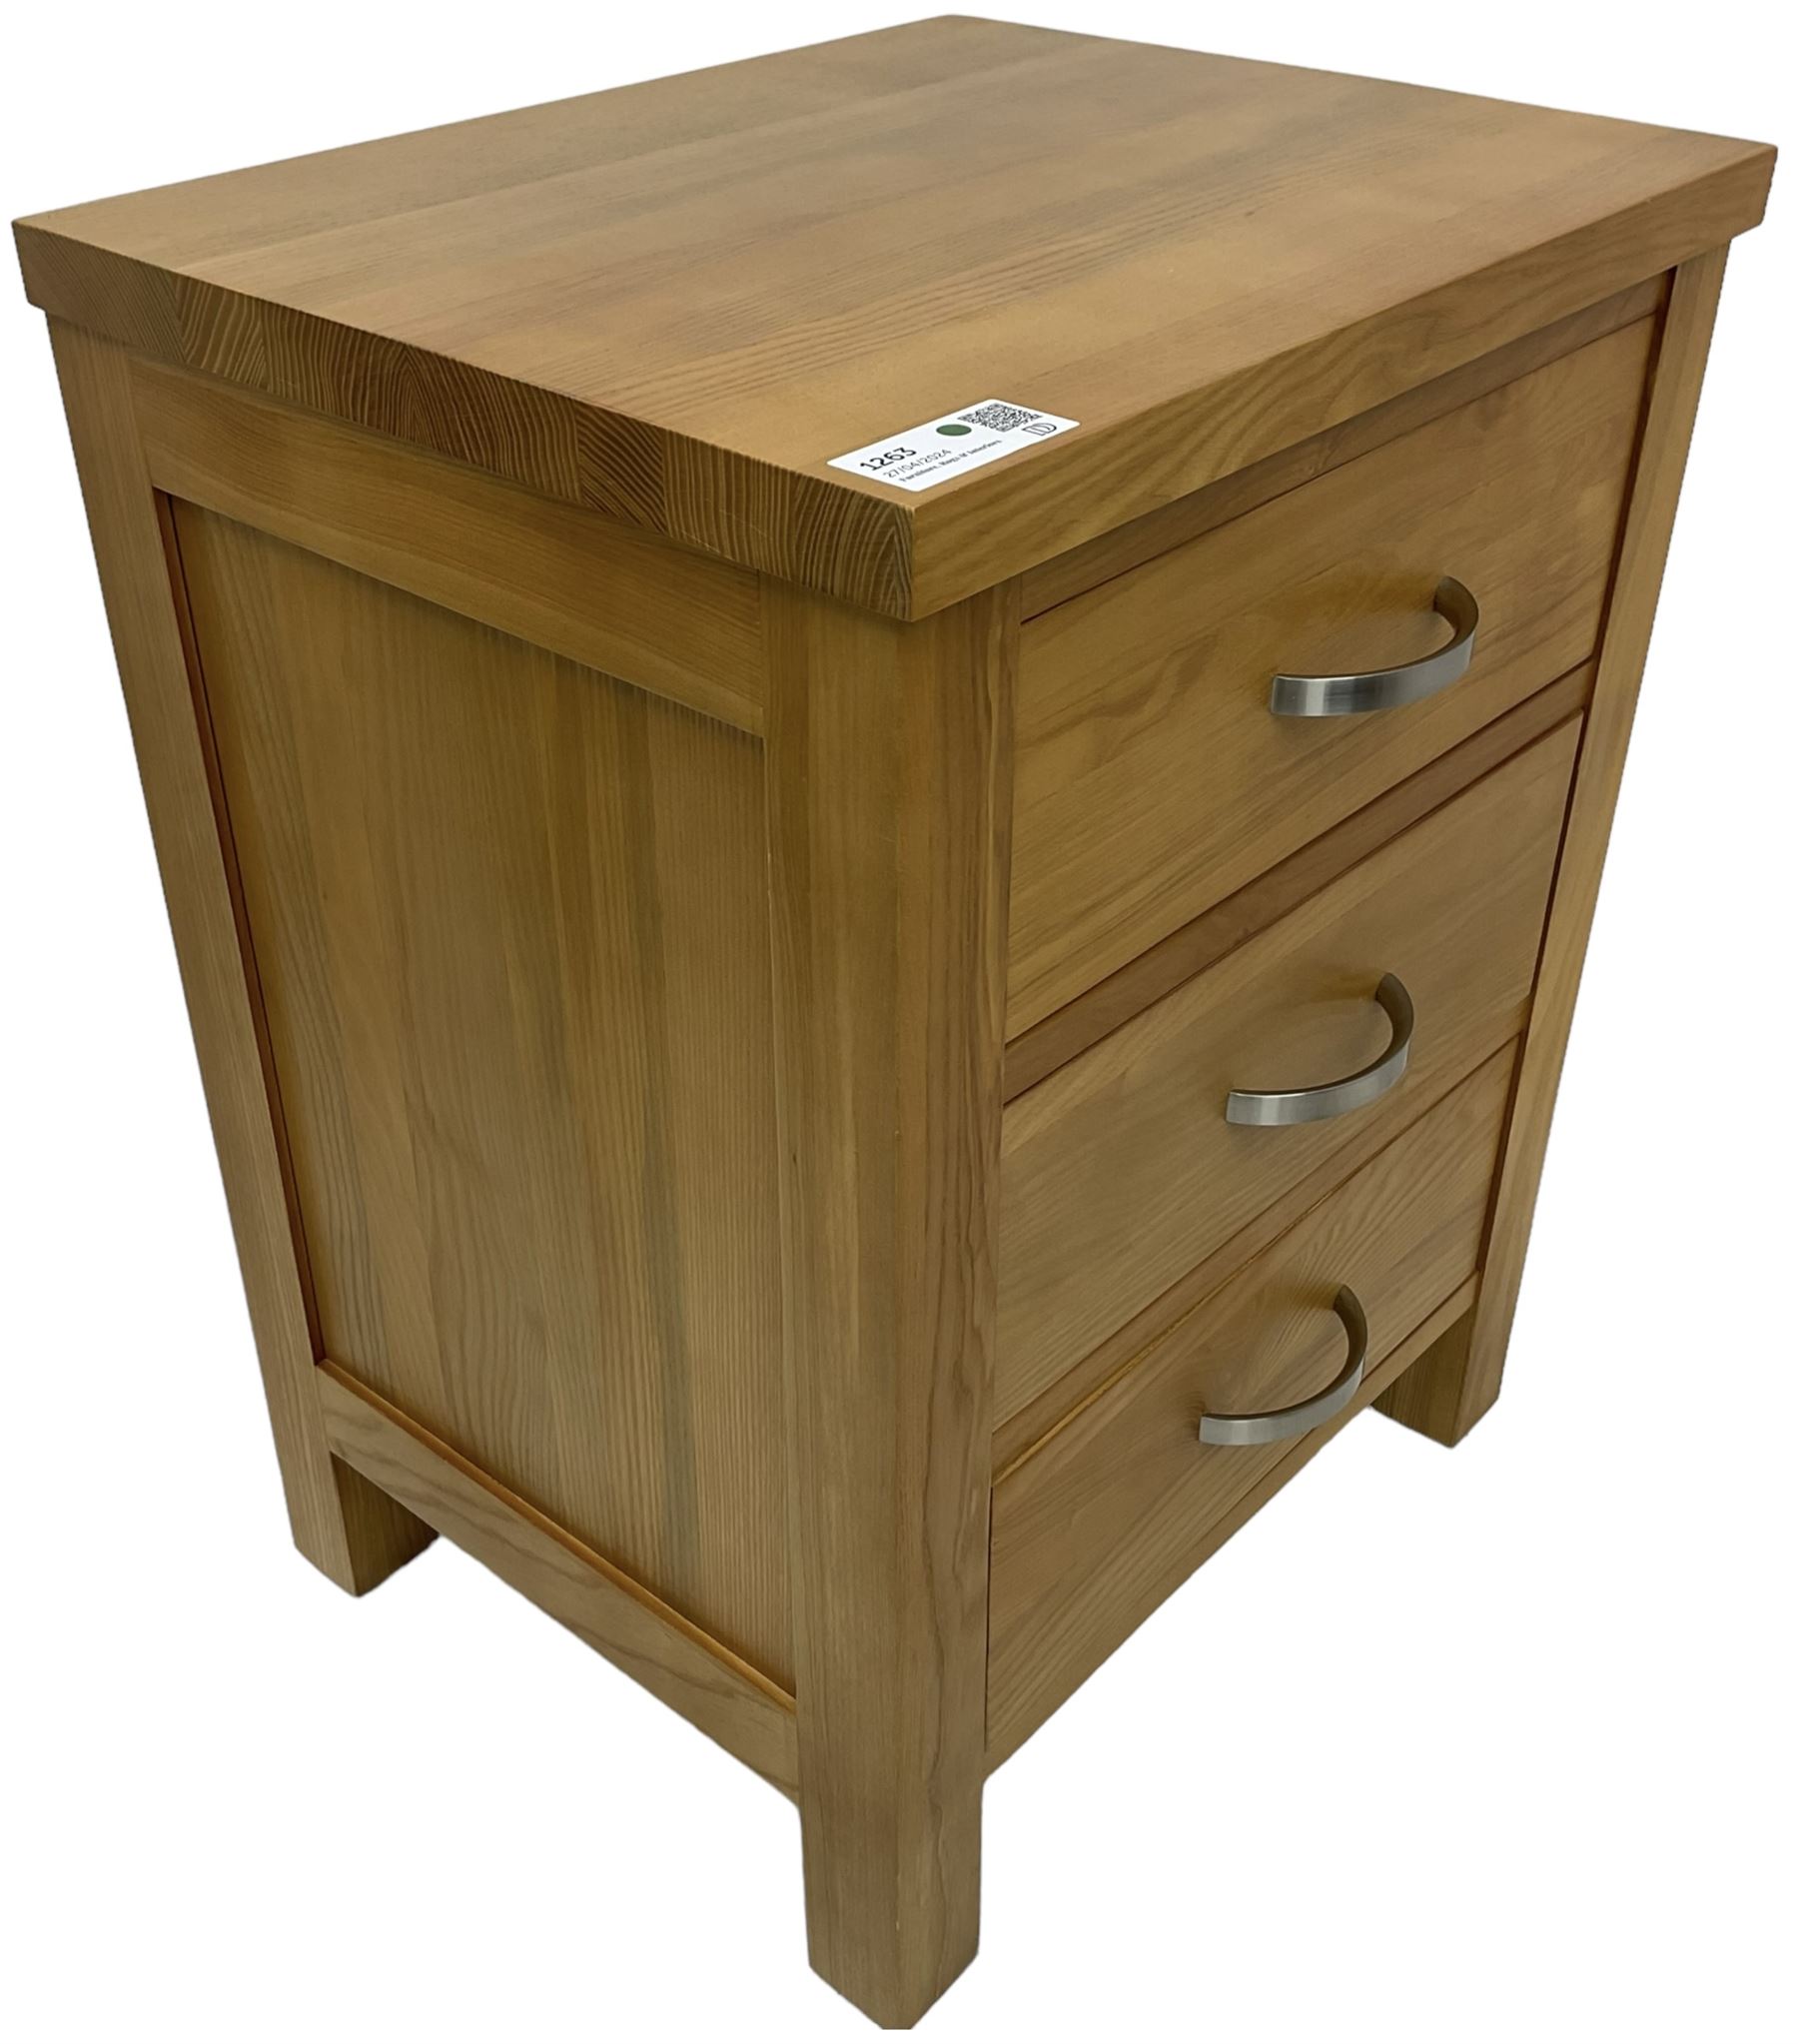 Light ash three drawer bedside chest - Image 7 of 7